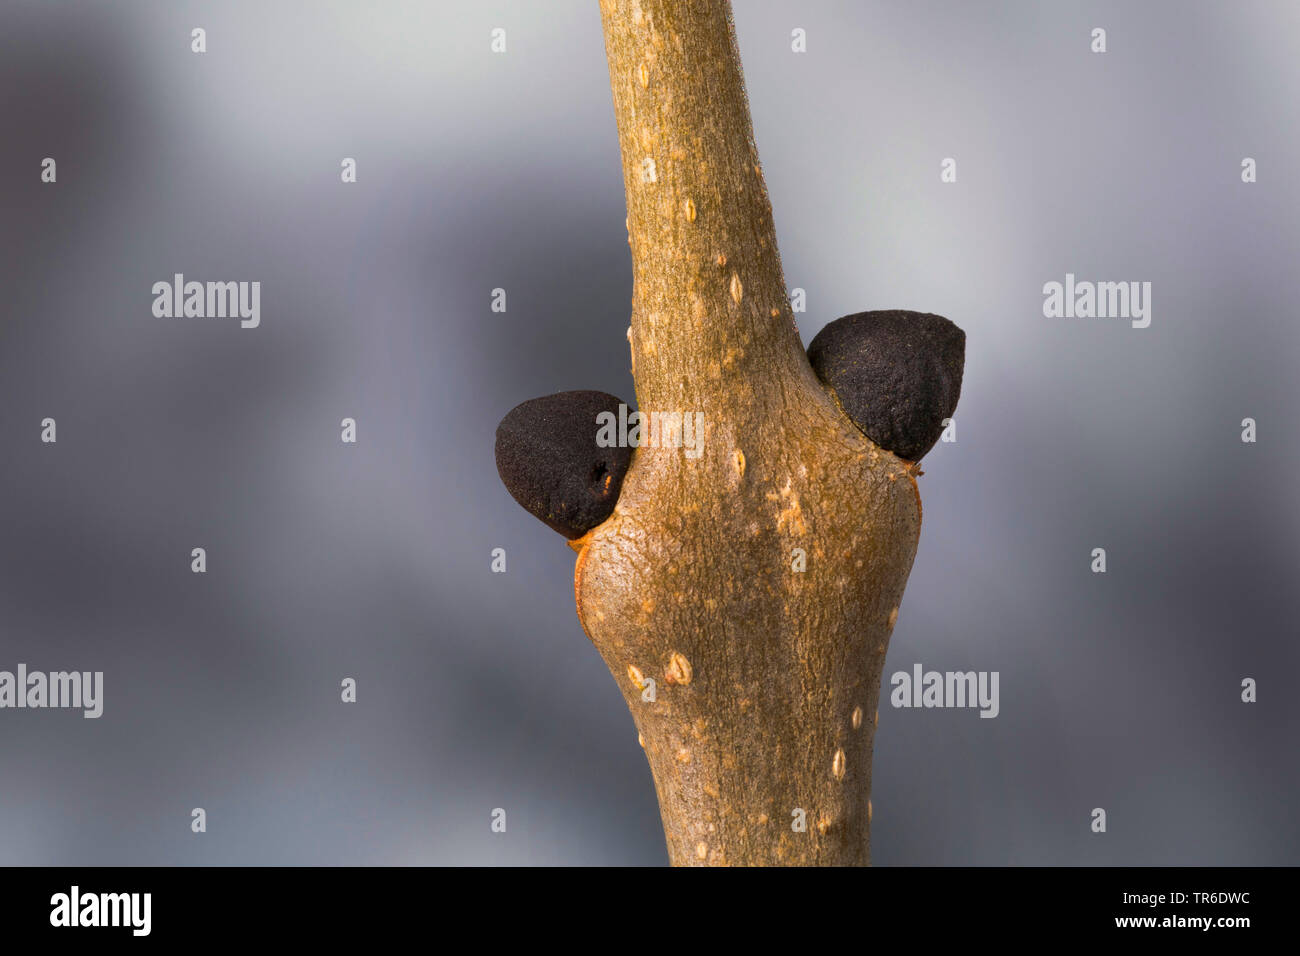 common ash, European ash (Fraxinus excelsior), branch with buds, Germany Stock Photo